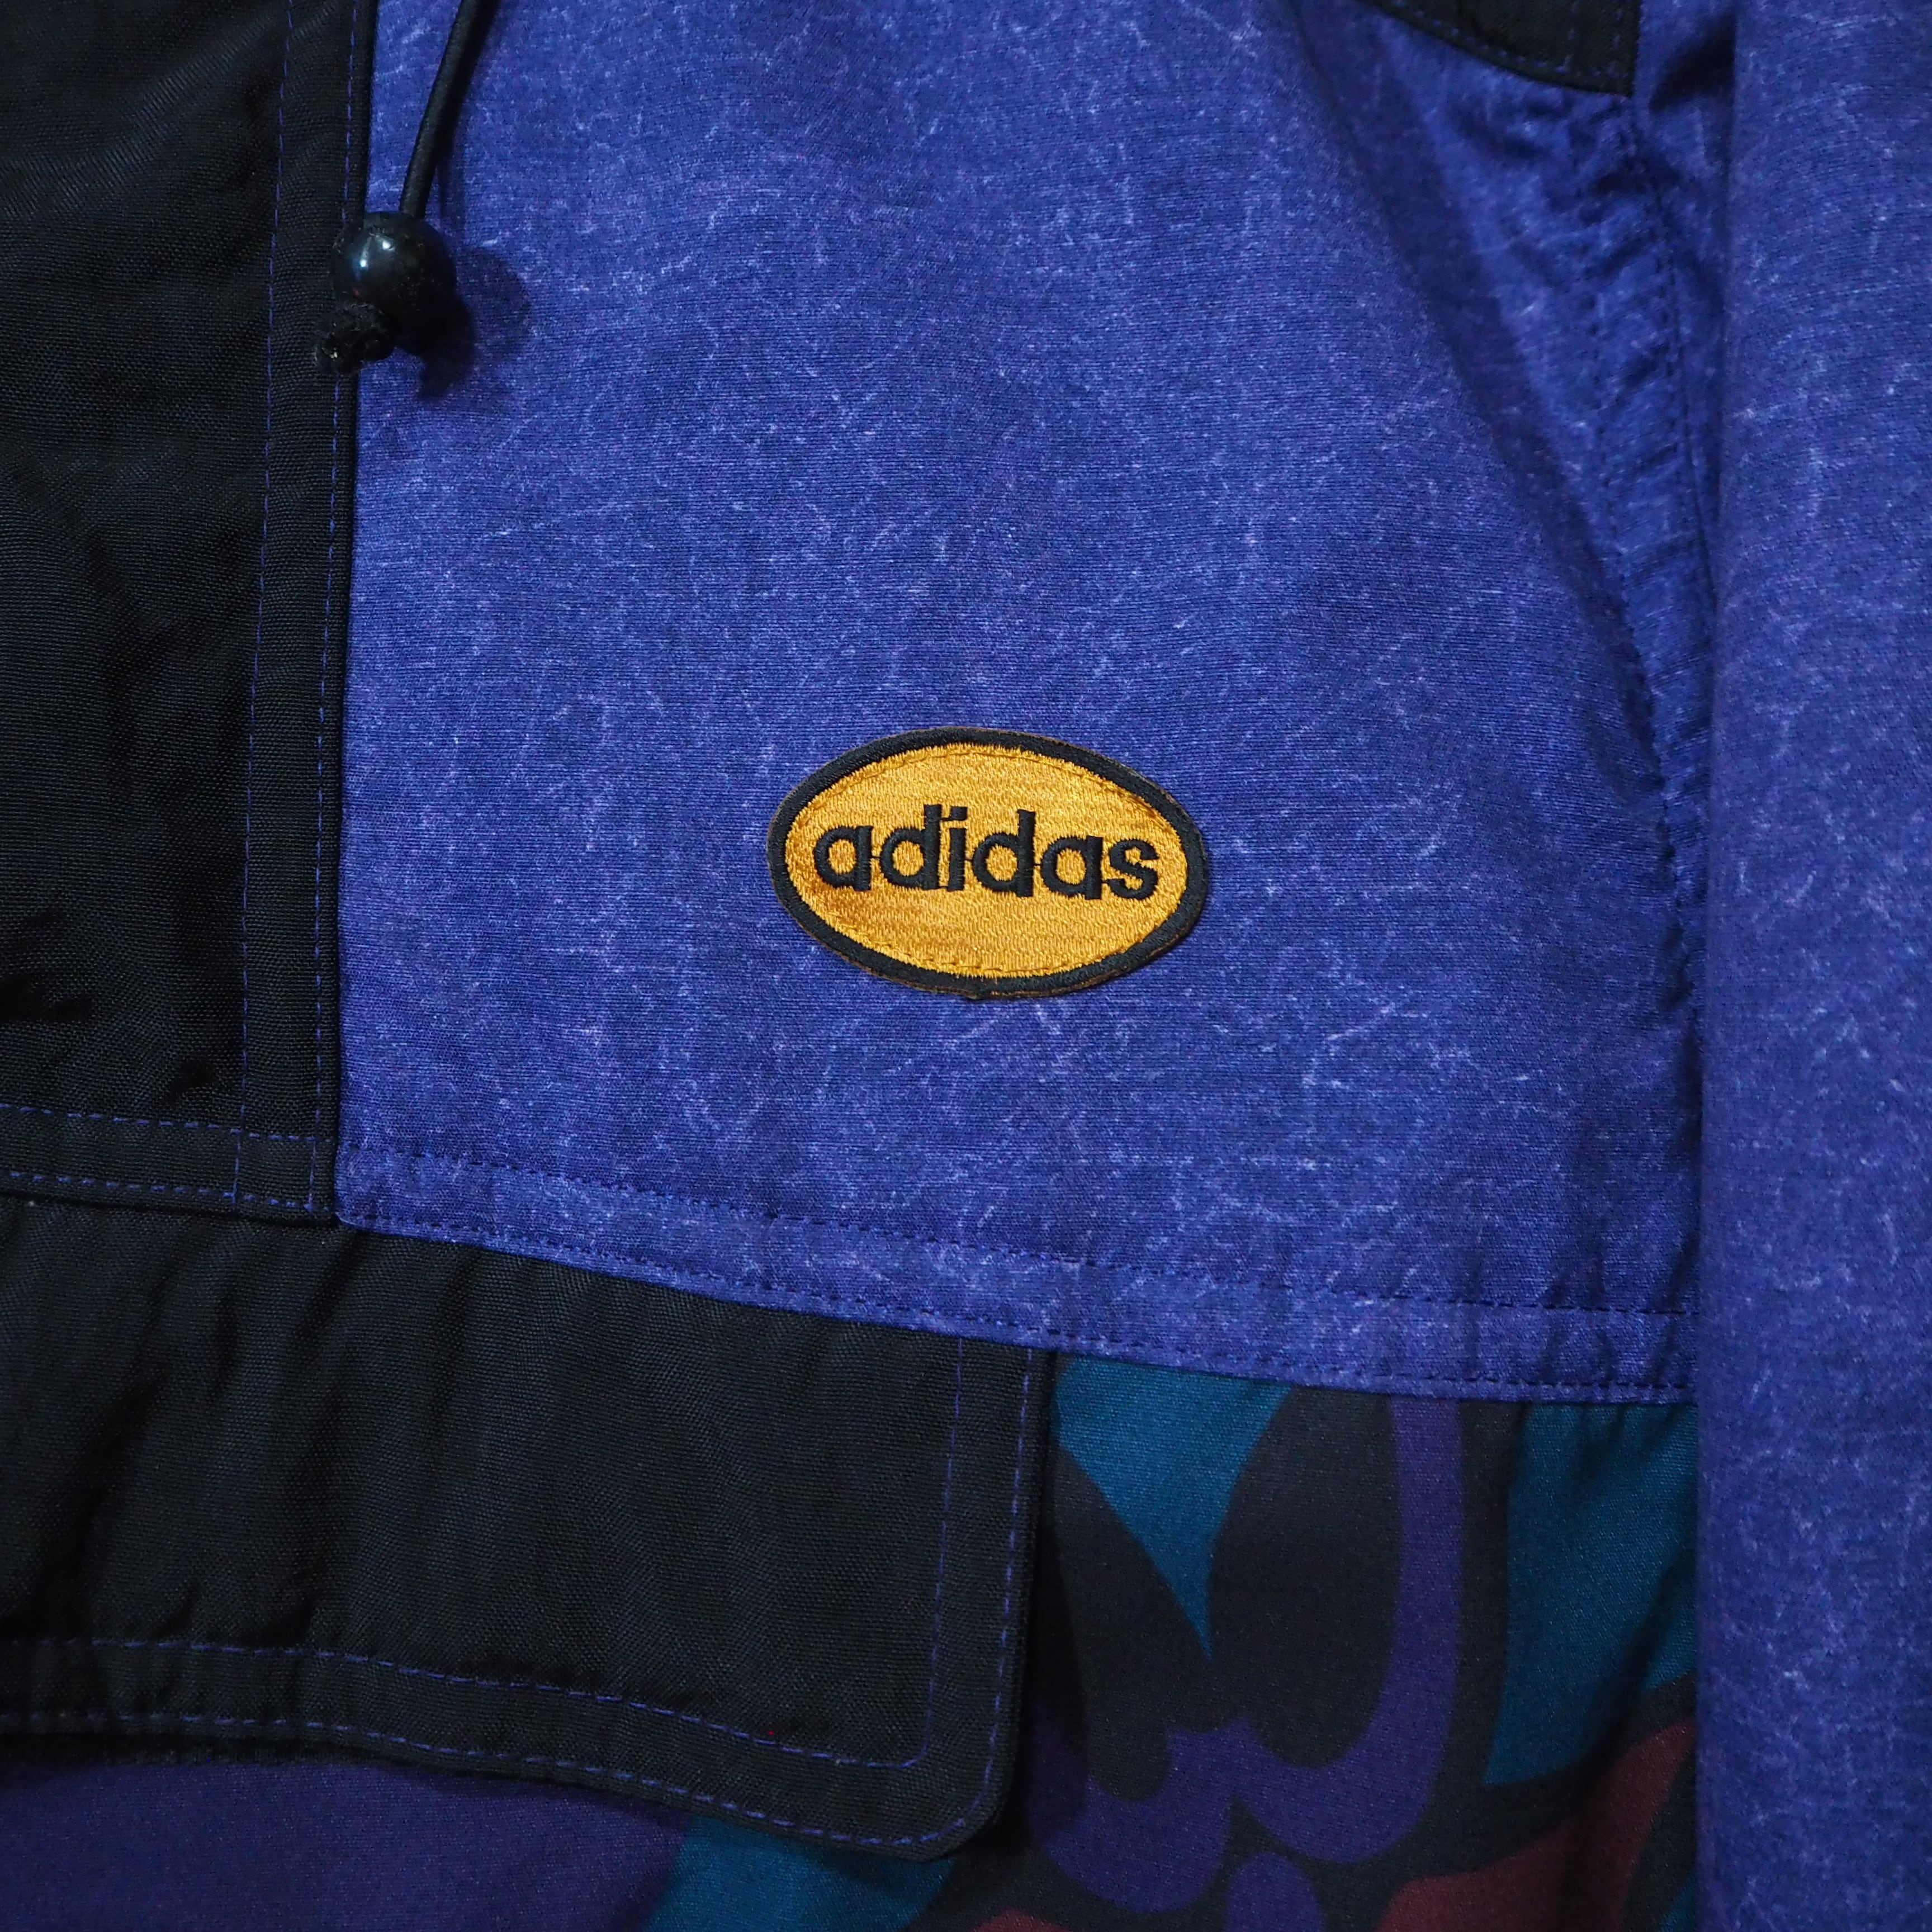 80s-90s “ADIDAS” made by DESCENTE Trefoil logo puff anorak parka 